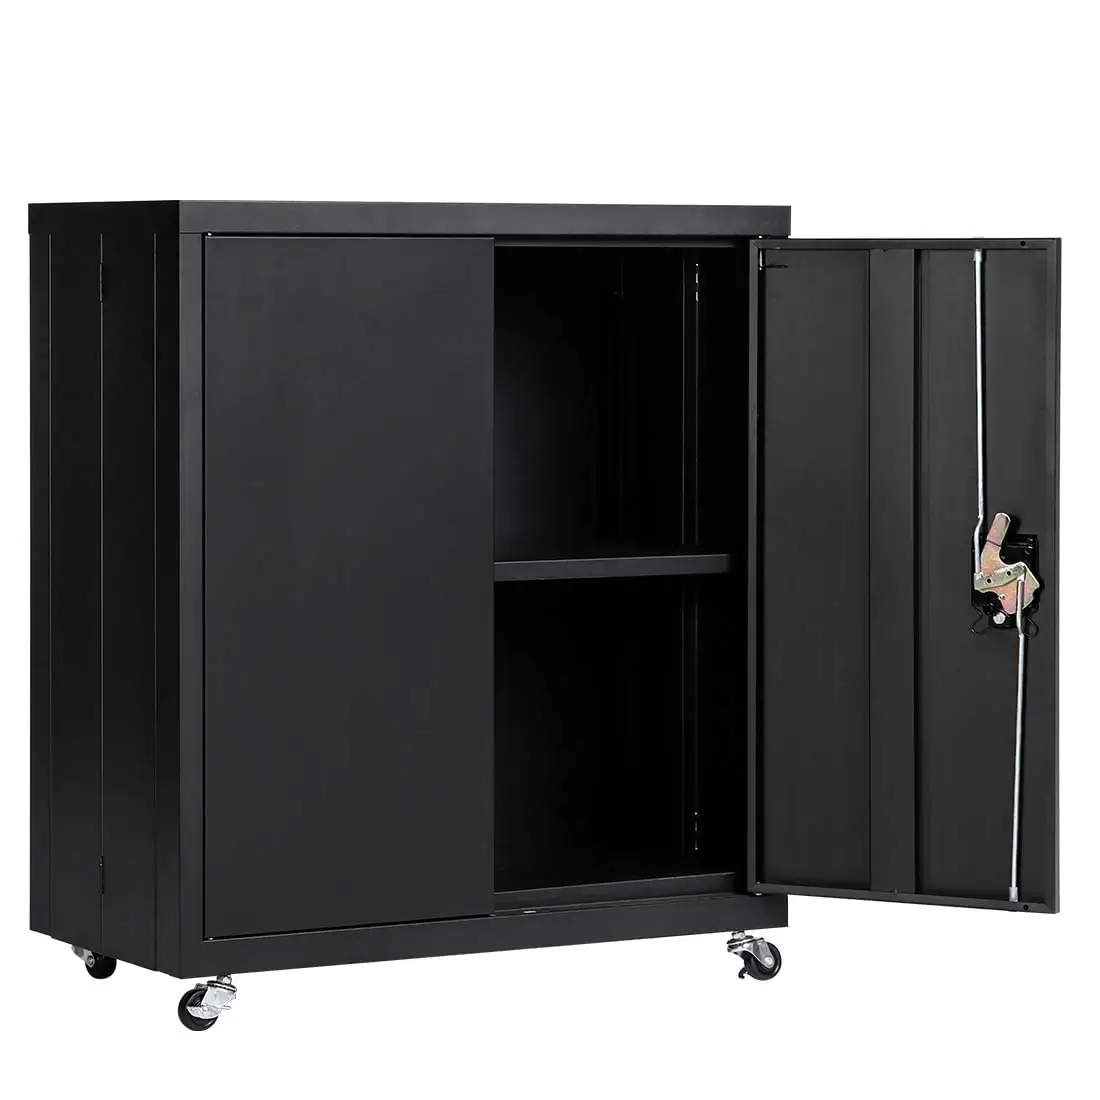 Metal Storage Cabinets with Wheels Lockable Steel Storage Cabinet with Doors and Shelves Office Cabinet for Home Office Garage